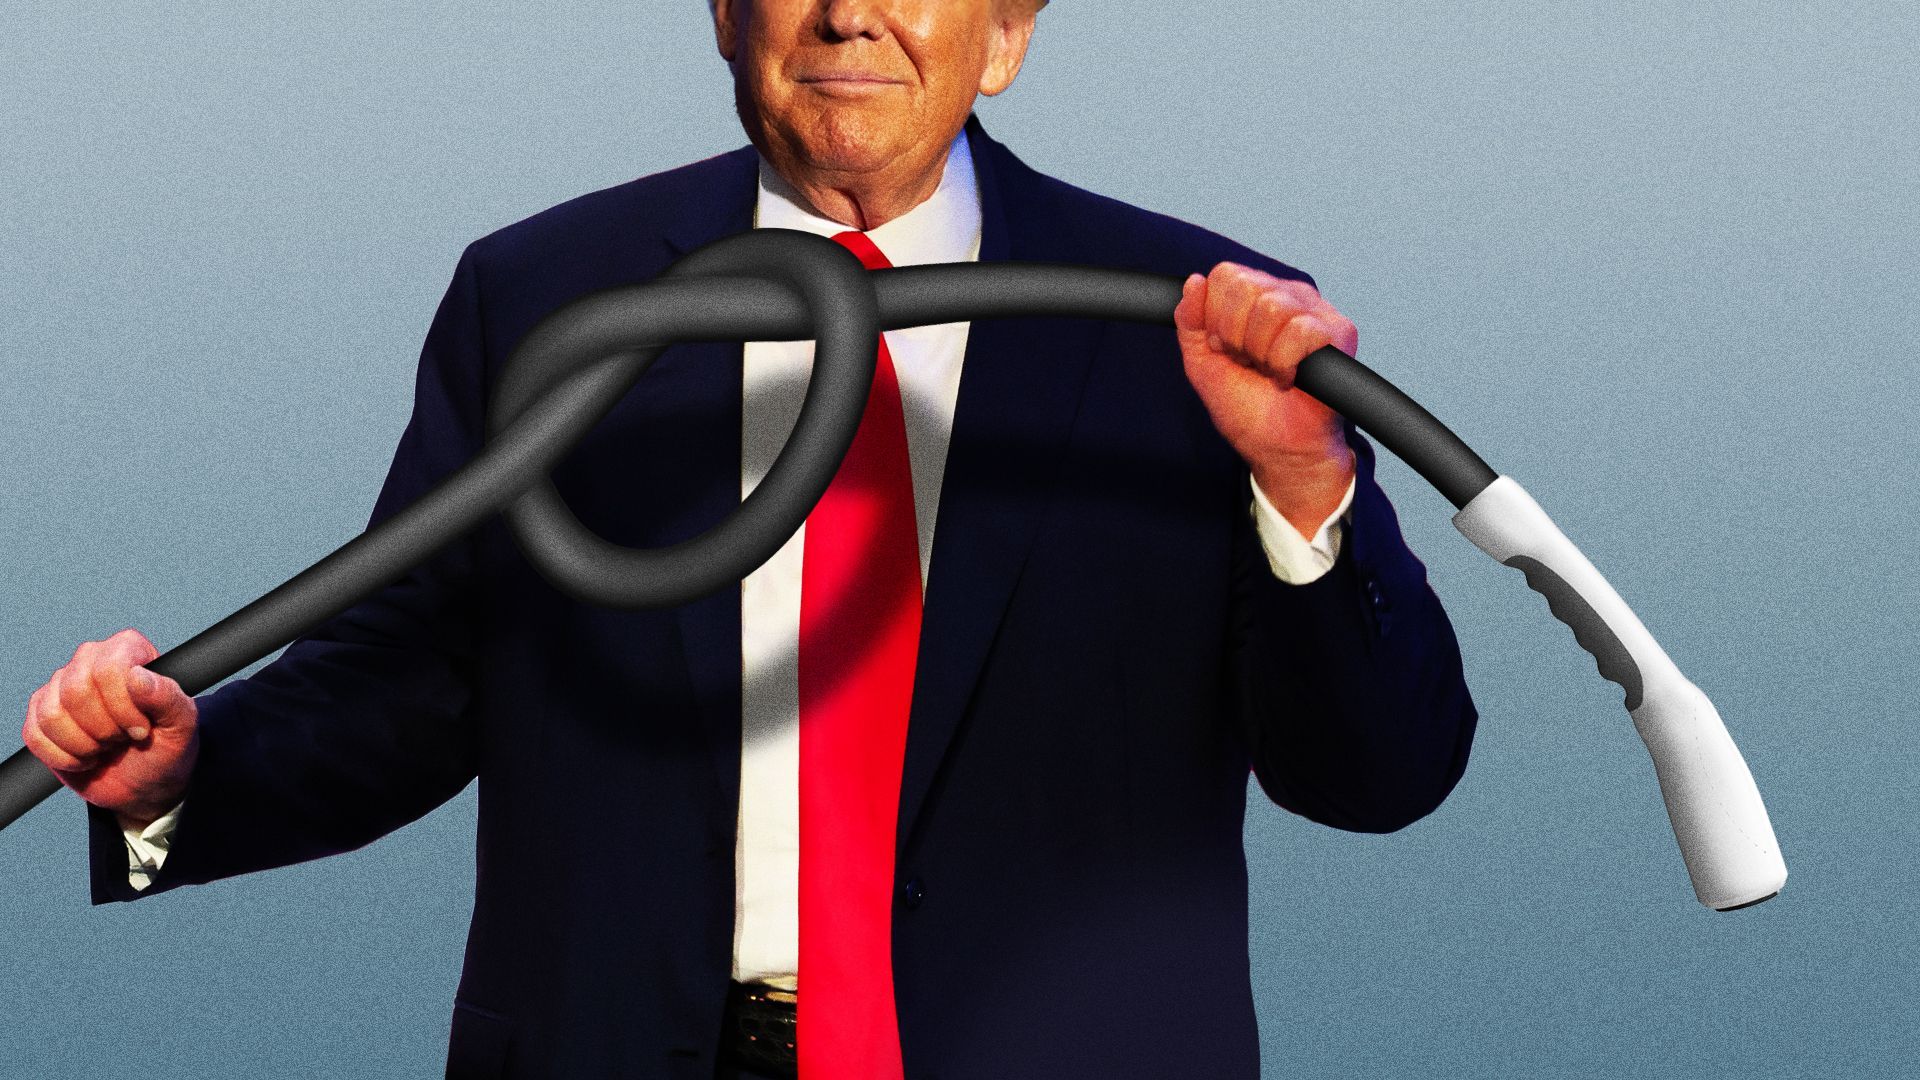 Illustration of Donald Trump tying an EV cord into a knot. 